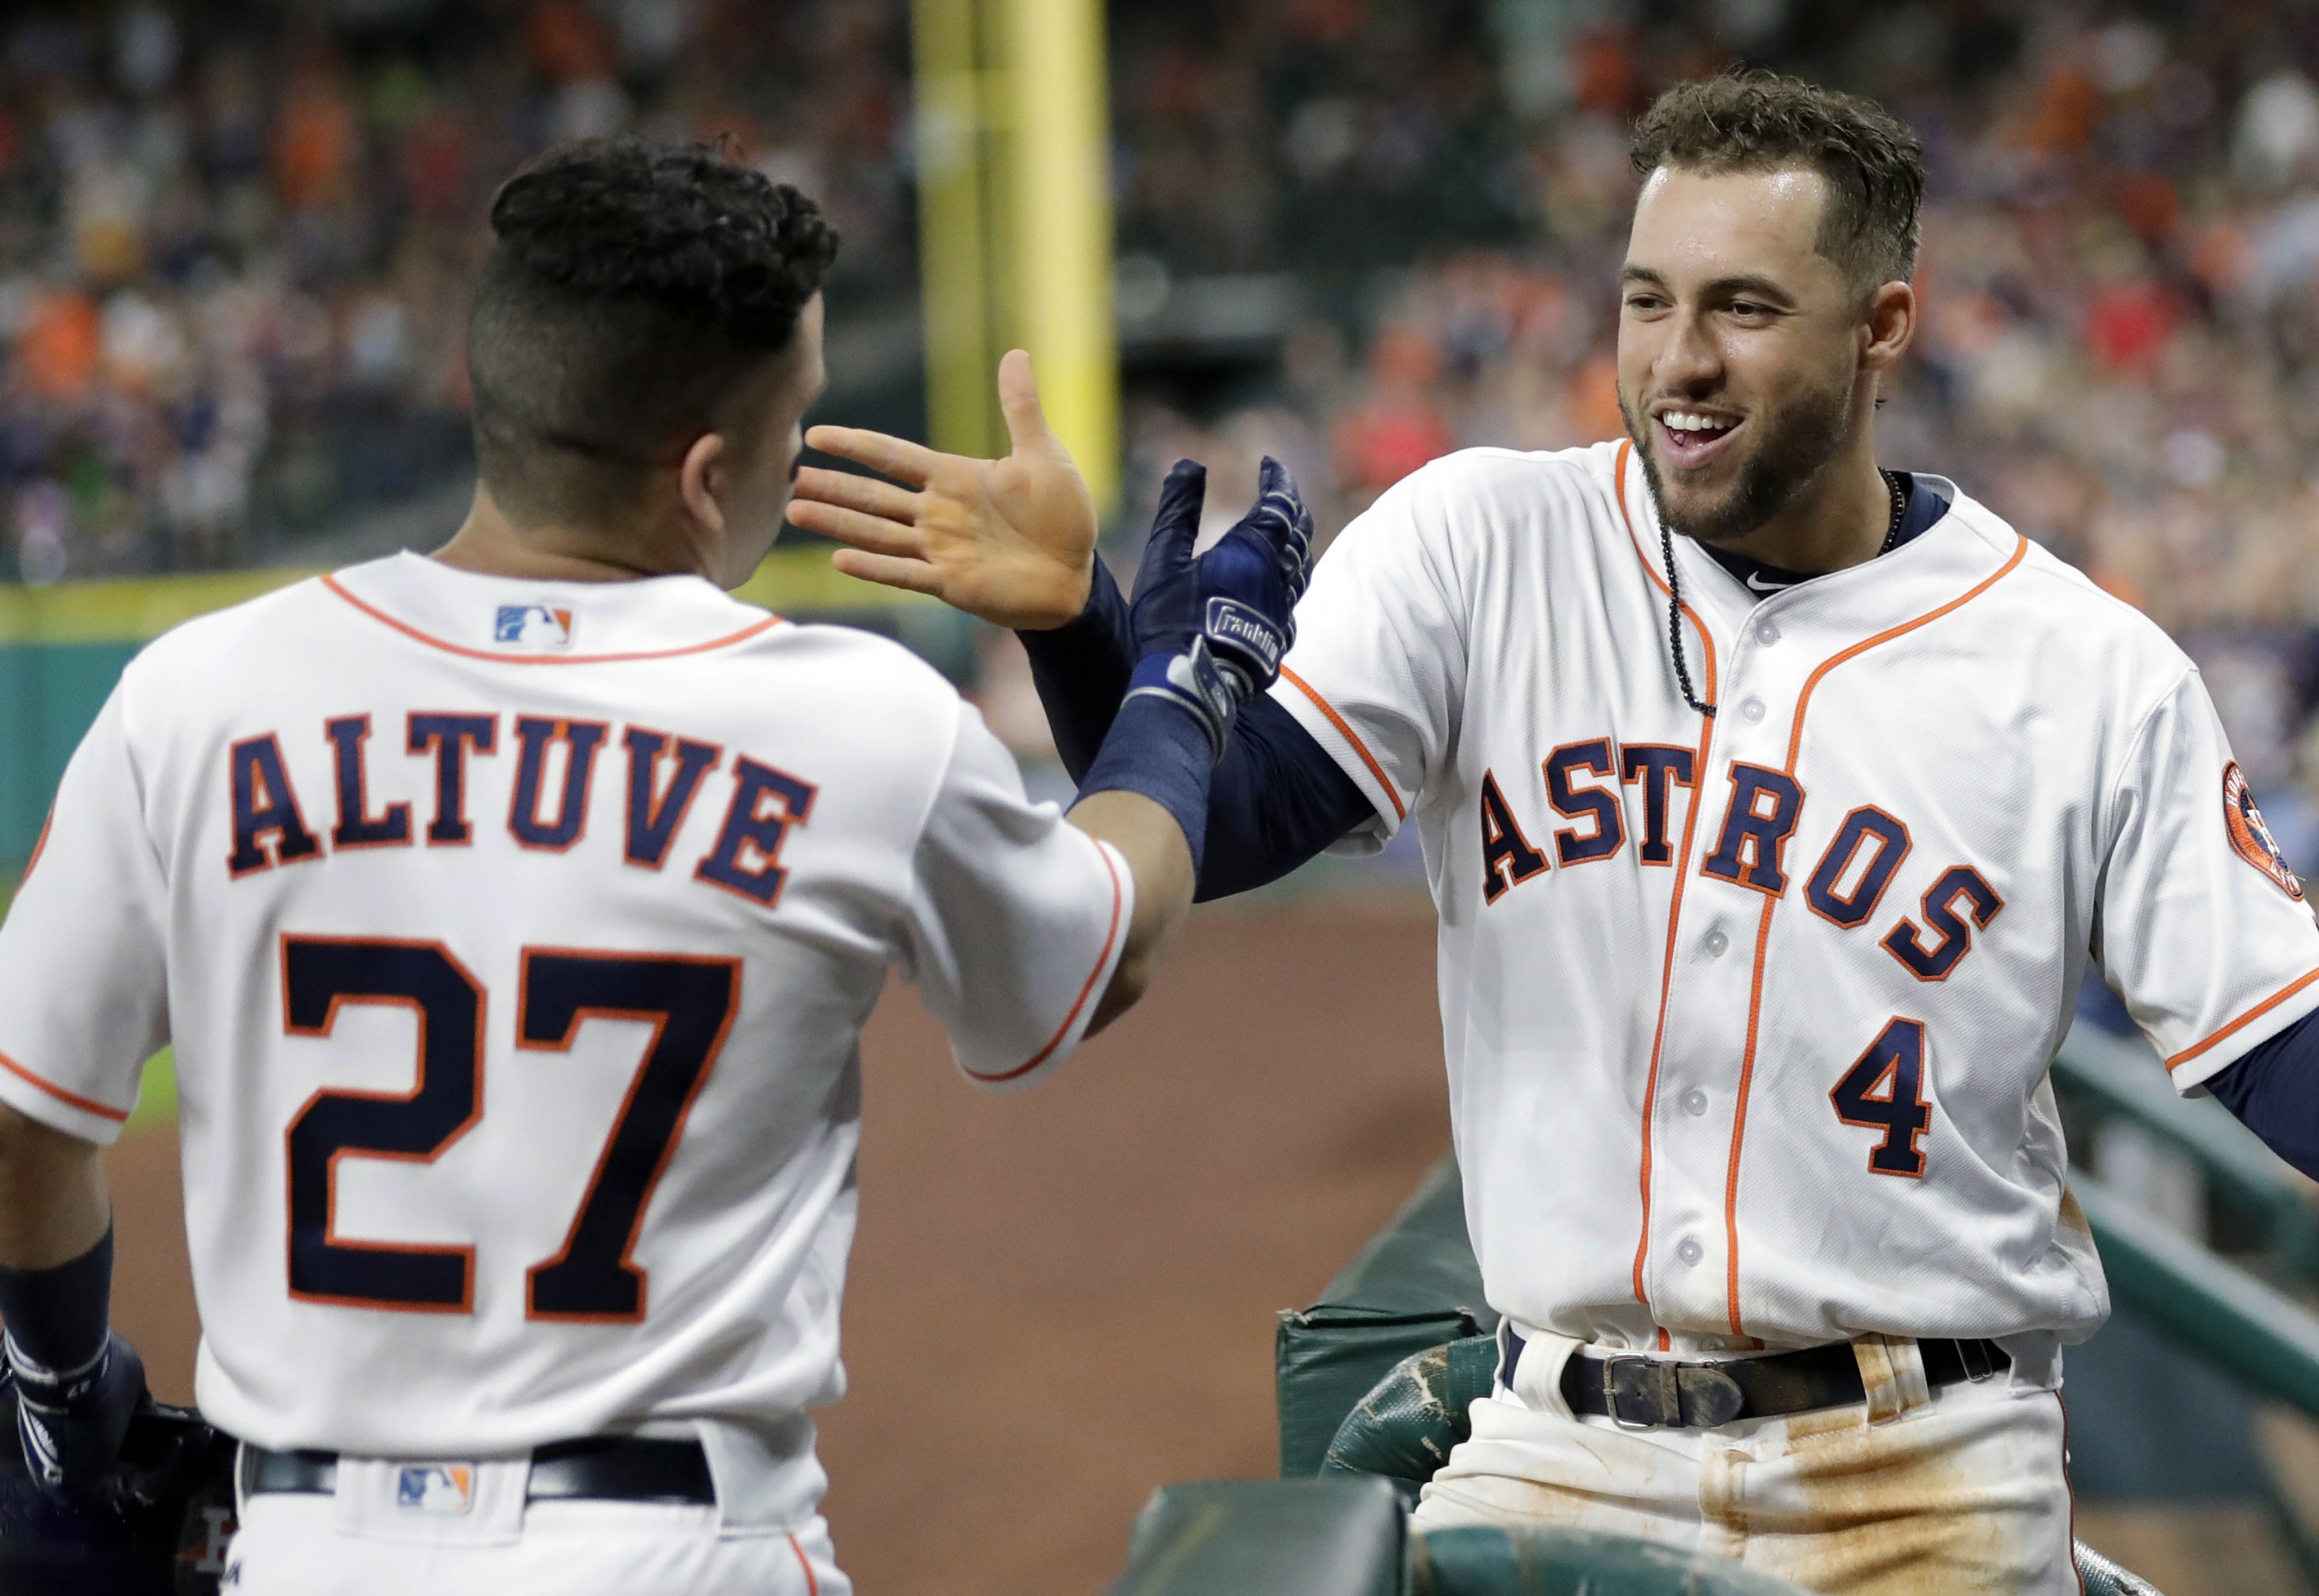 PURE JOY: See the smiles on the field as the Houston Astros